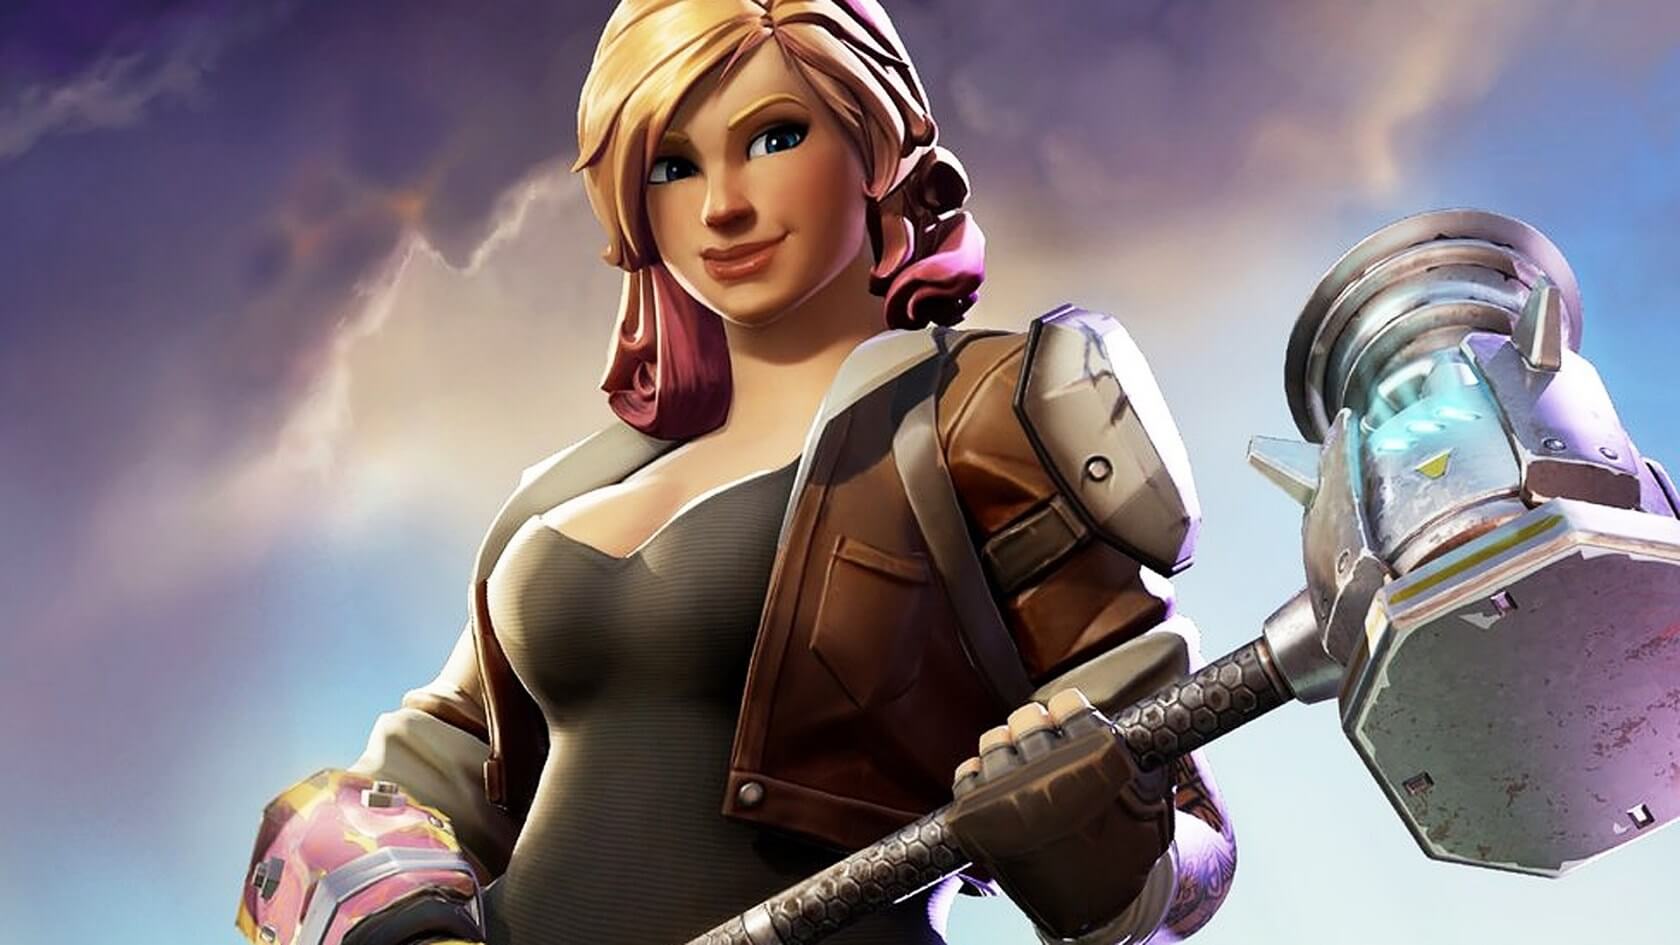 Epic Games blasts Google for disclosing Fortnite Android exploit early